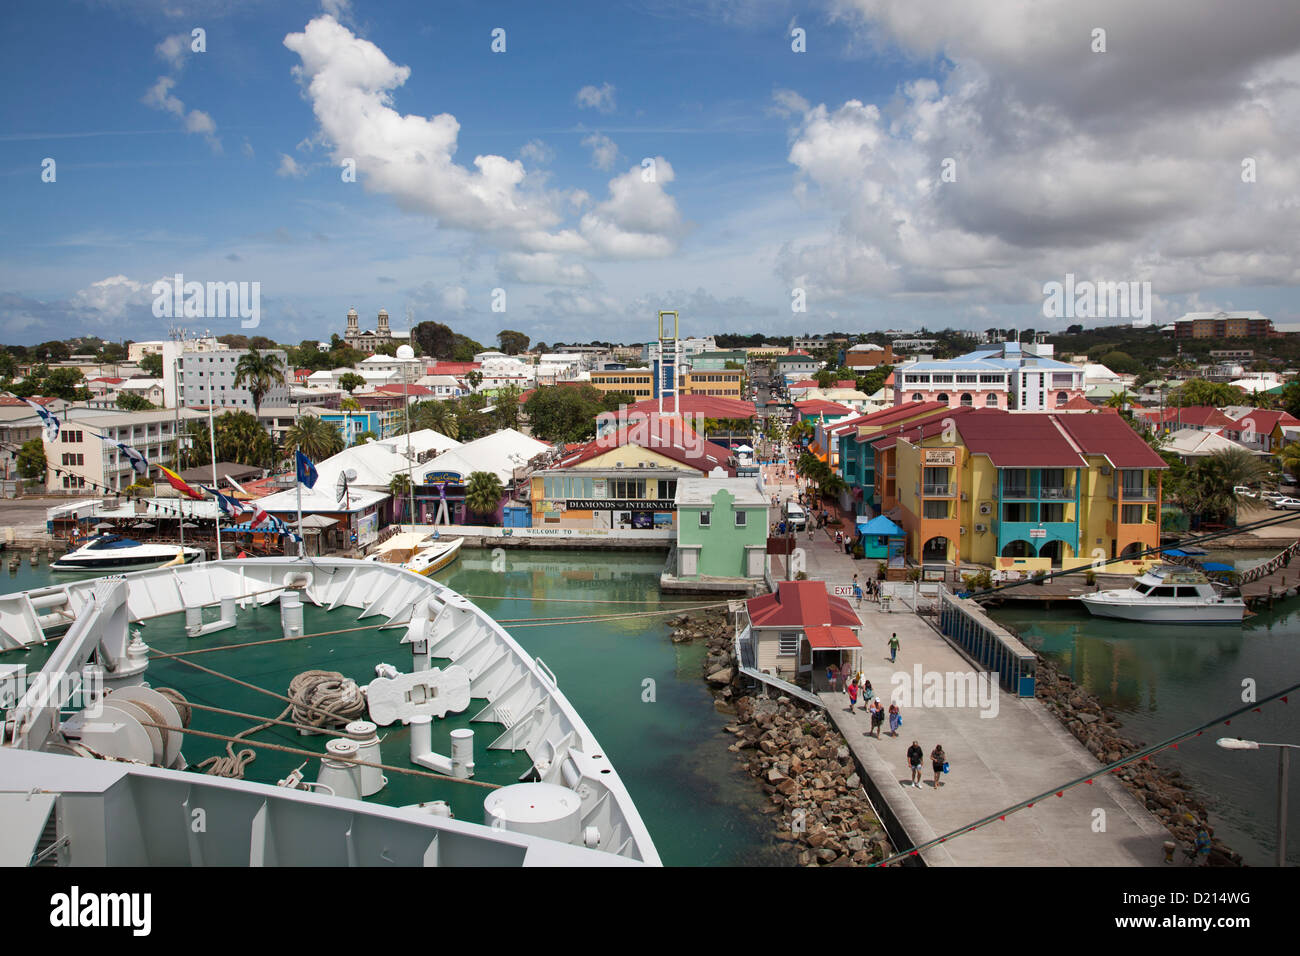 Bow of cruise ship MS Deutschland (Reederei Peter Deilmann) at a pier with colorful houses and shops near the port, St. John's, Stock Photo